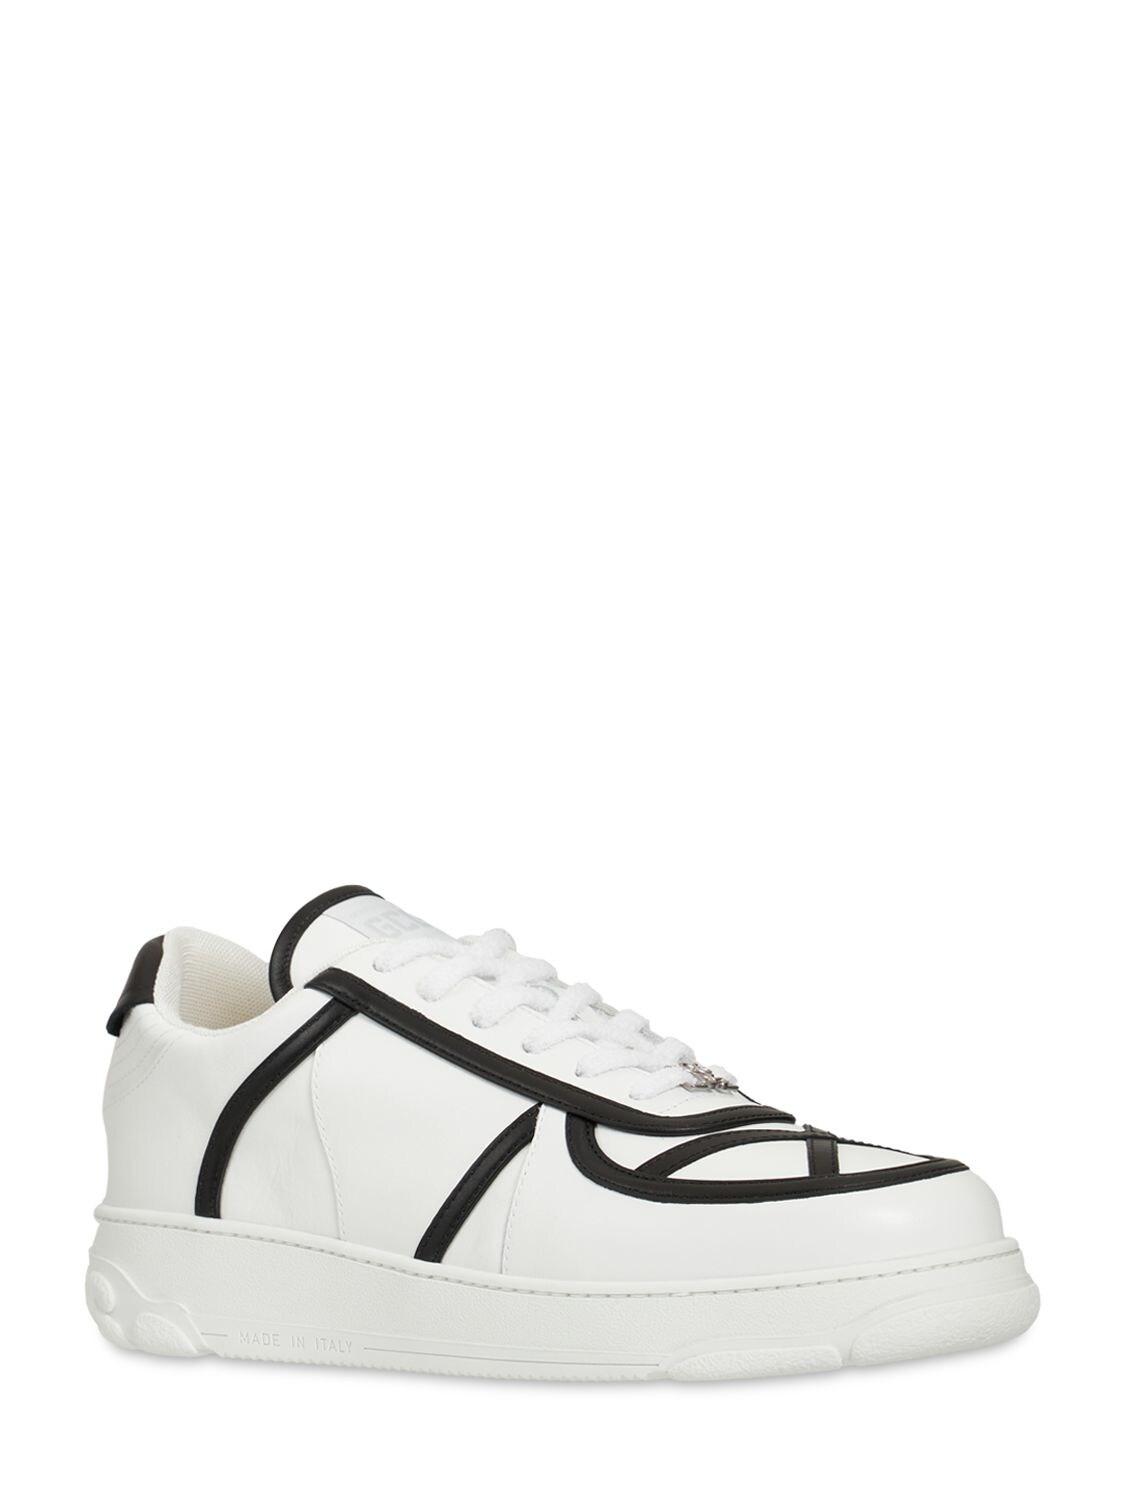 Gcds Nami Bicolor Leather Sneakers in White for Men - Lyst